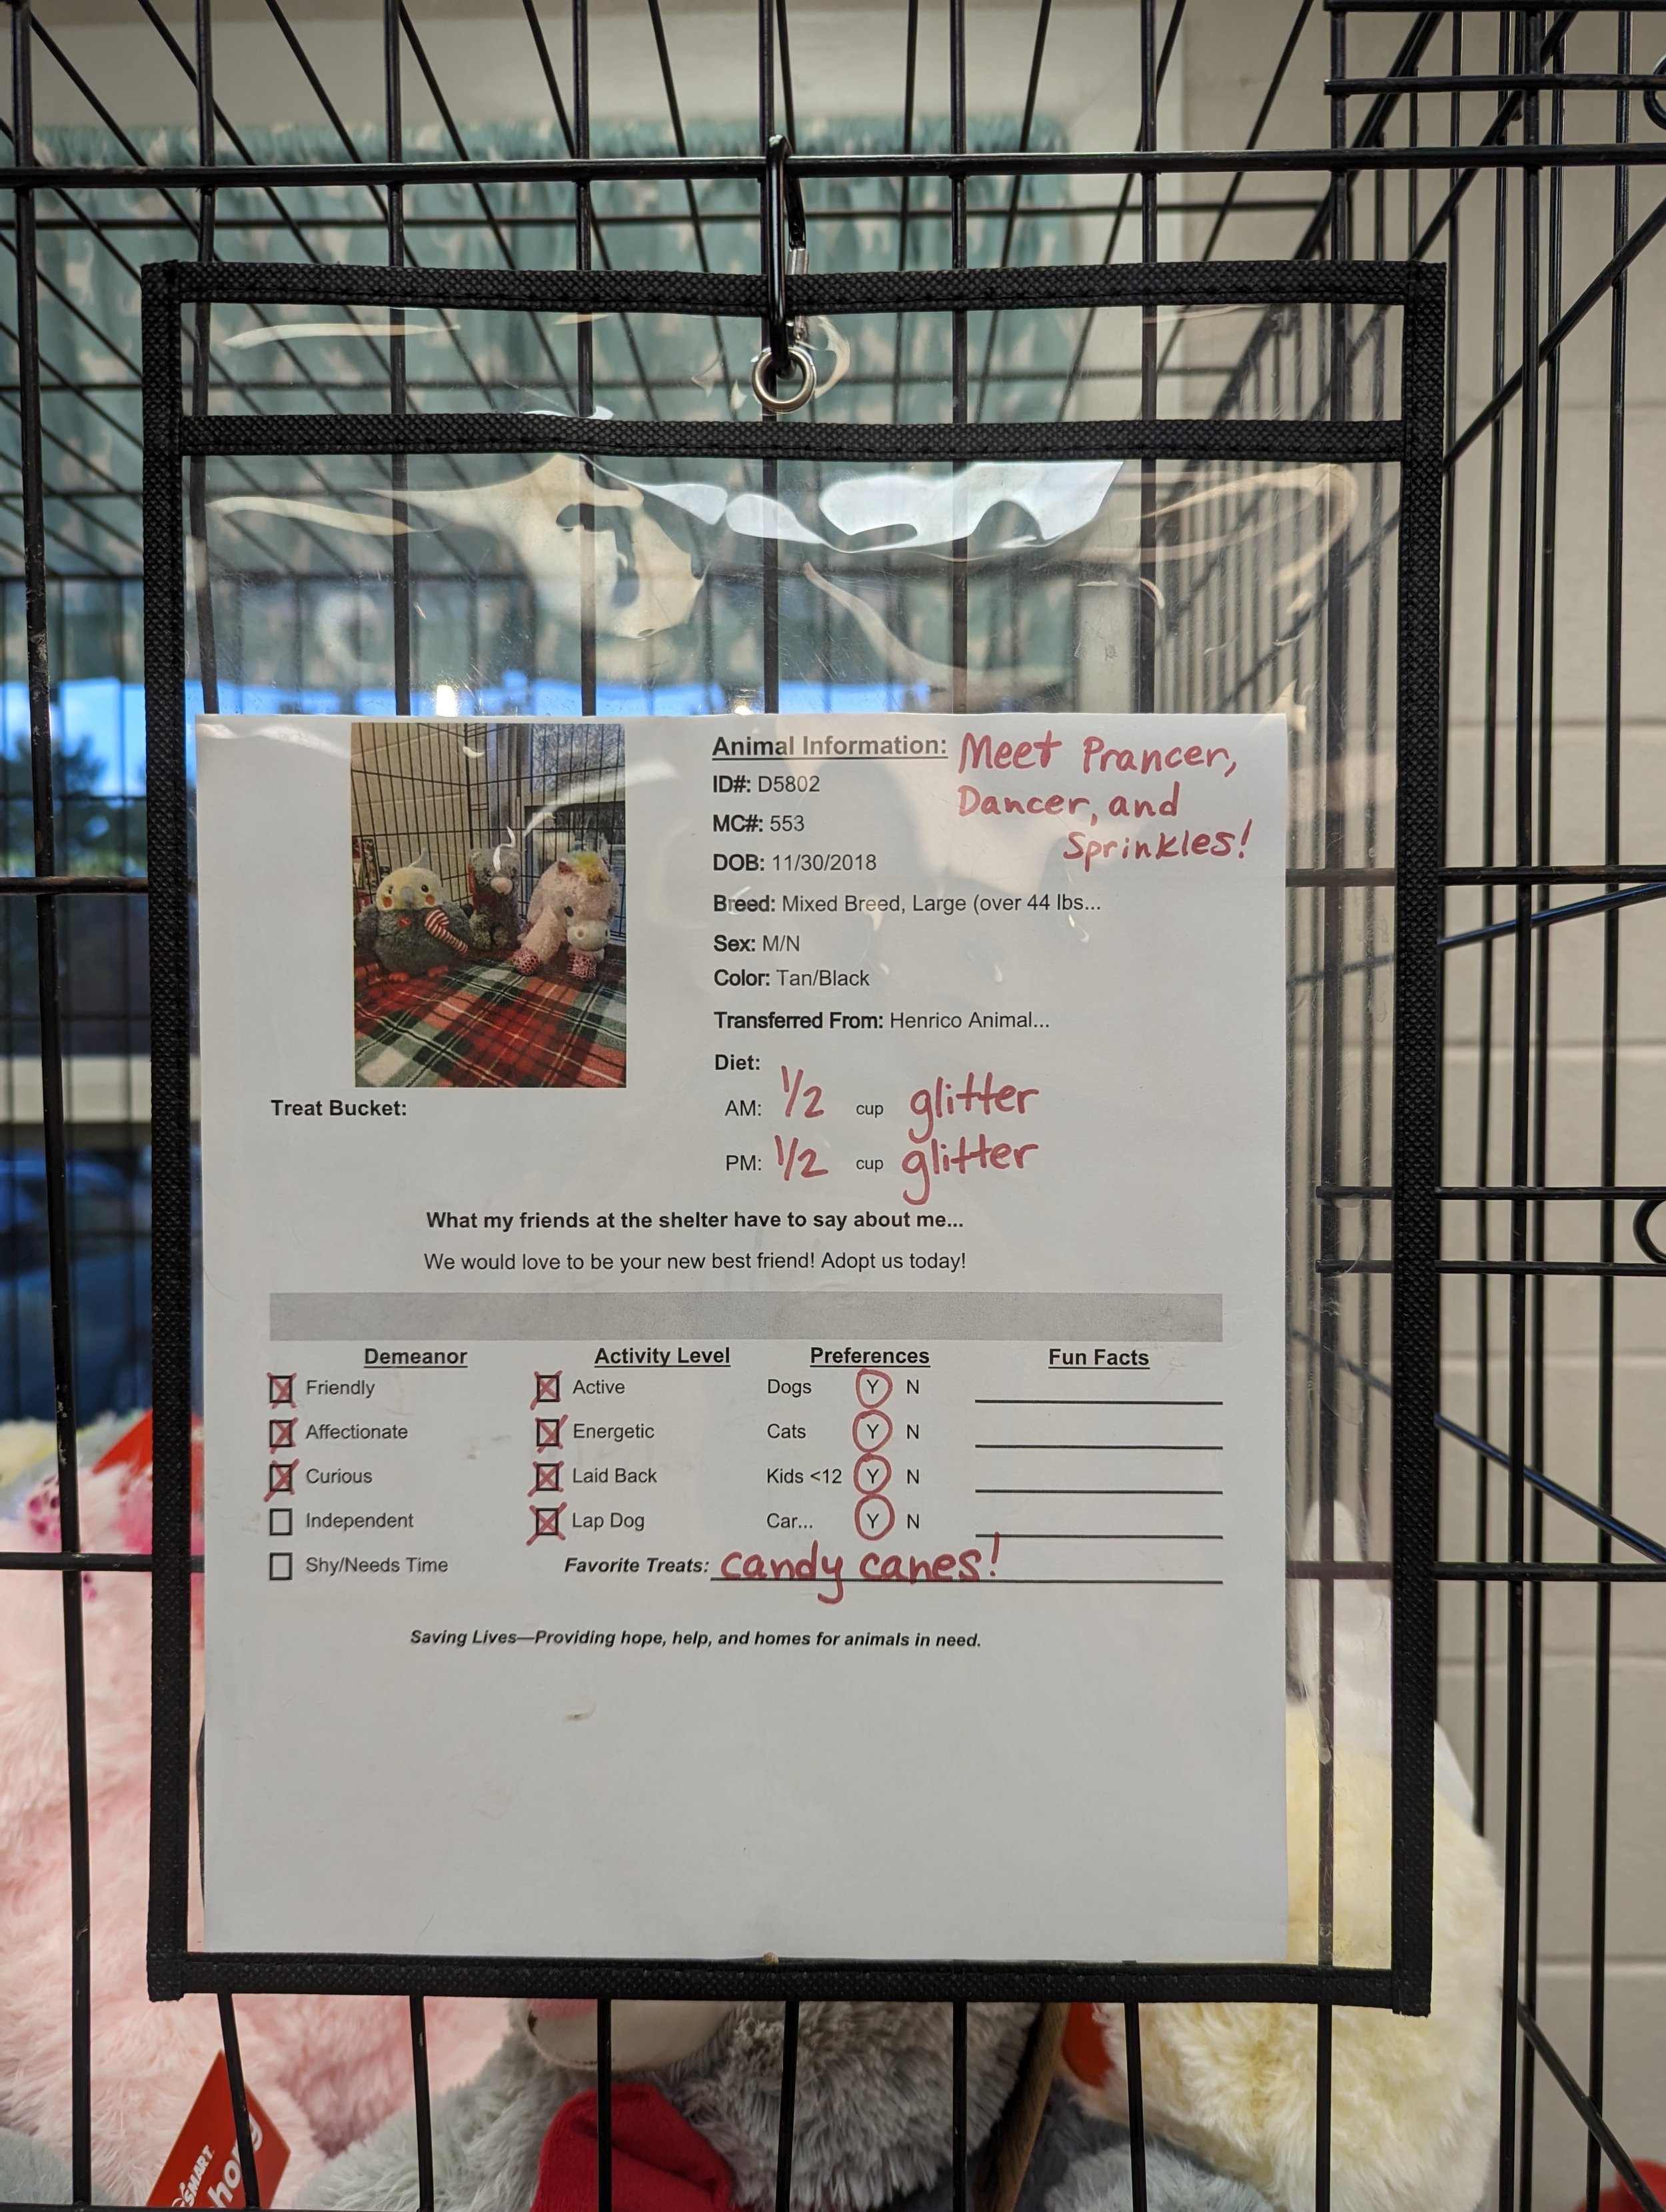 Adoption coordinator Rian Slate made them the cutest kennel cards